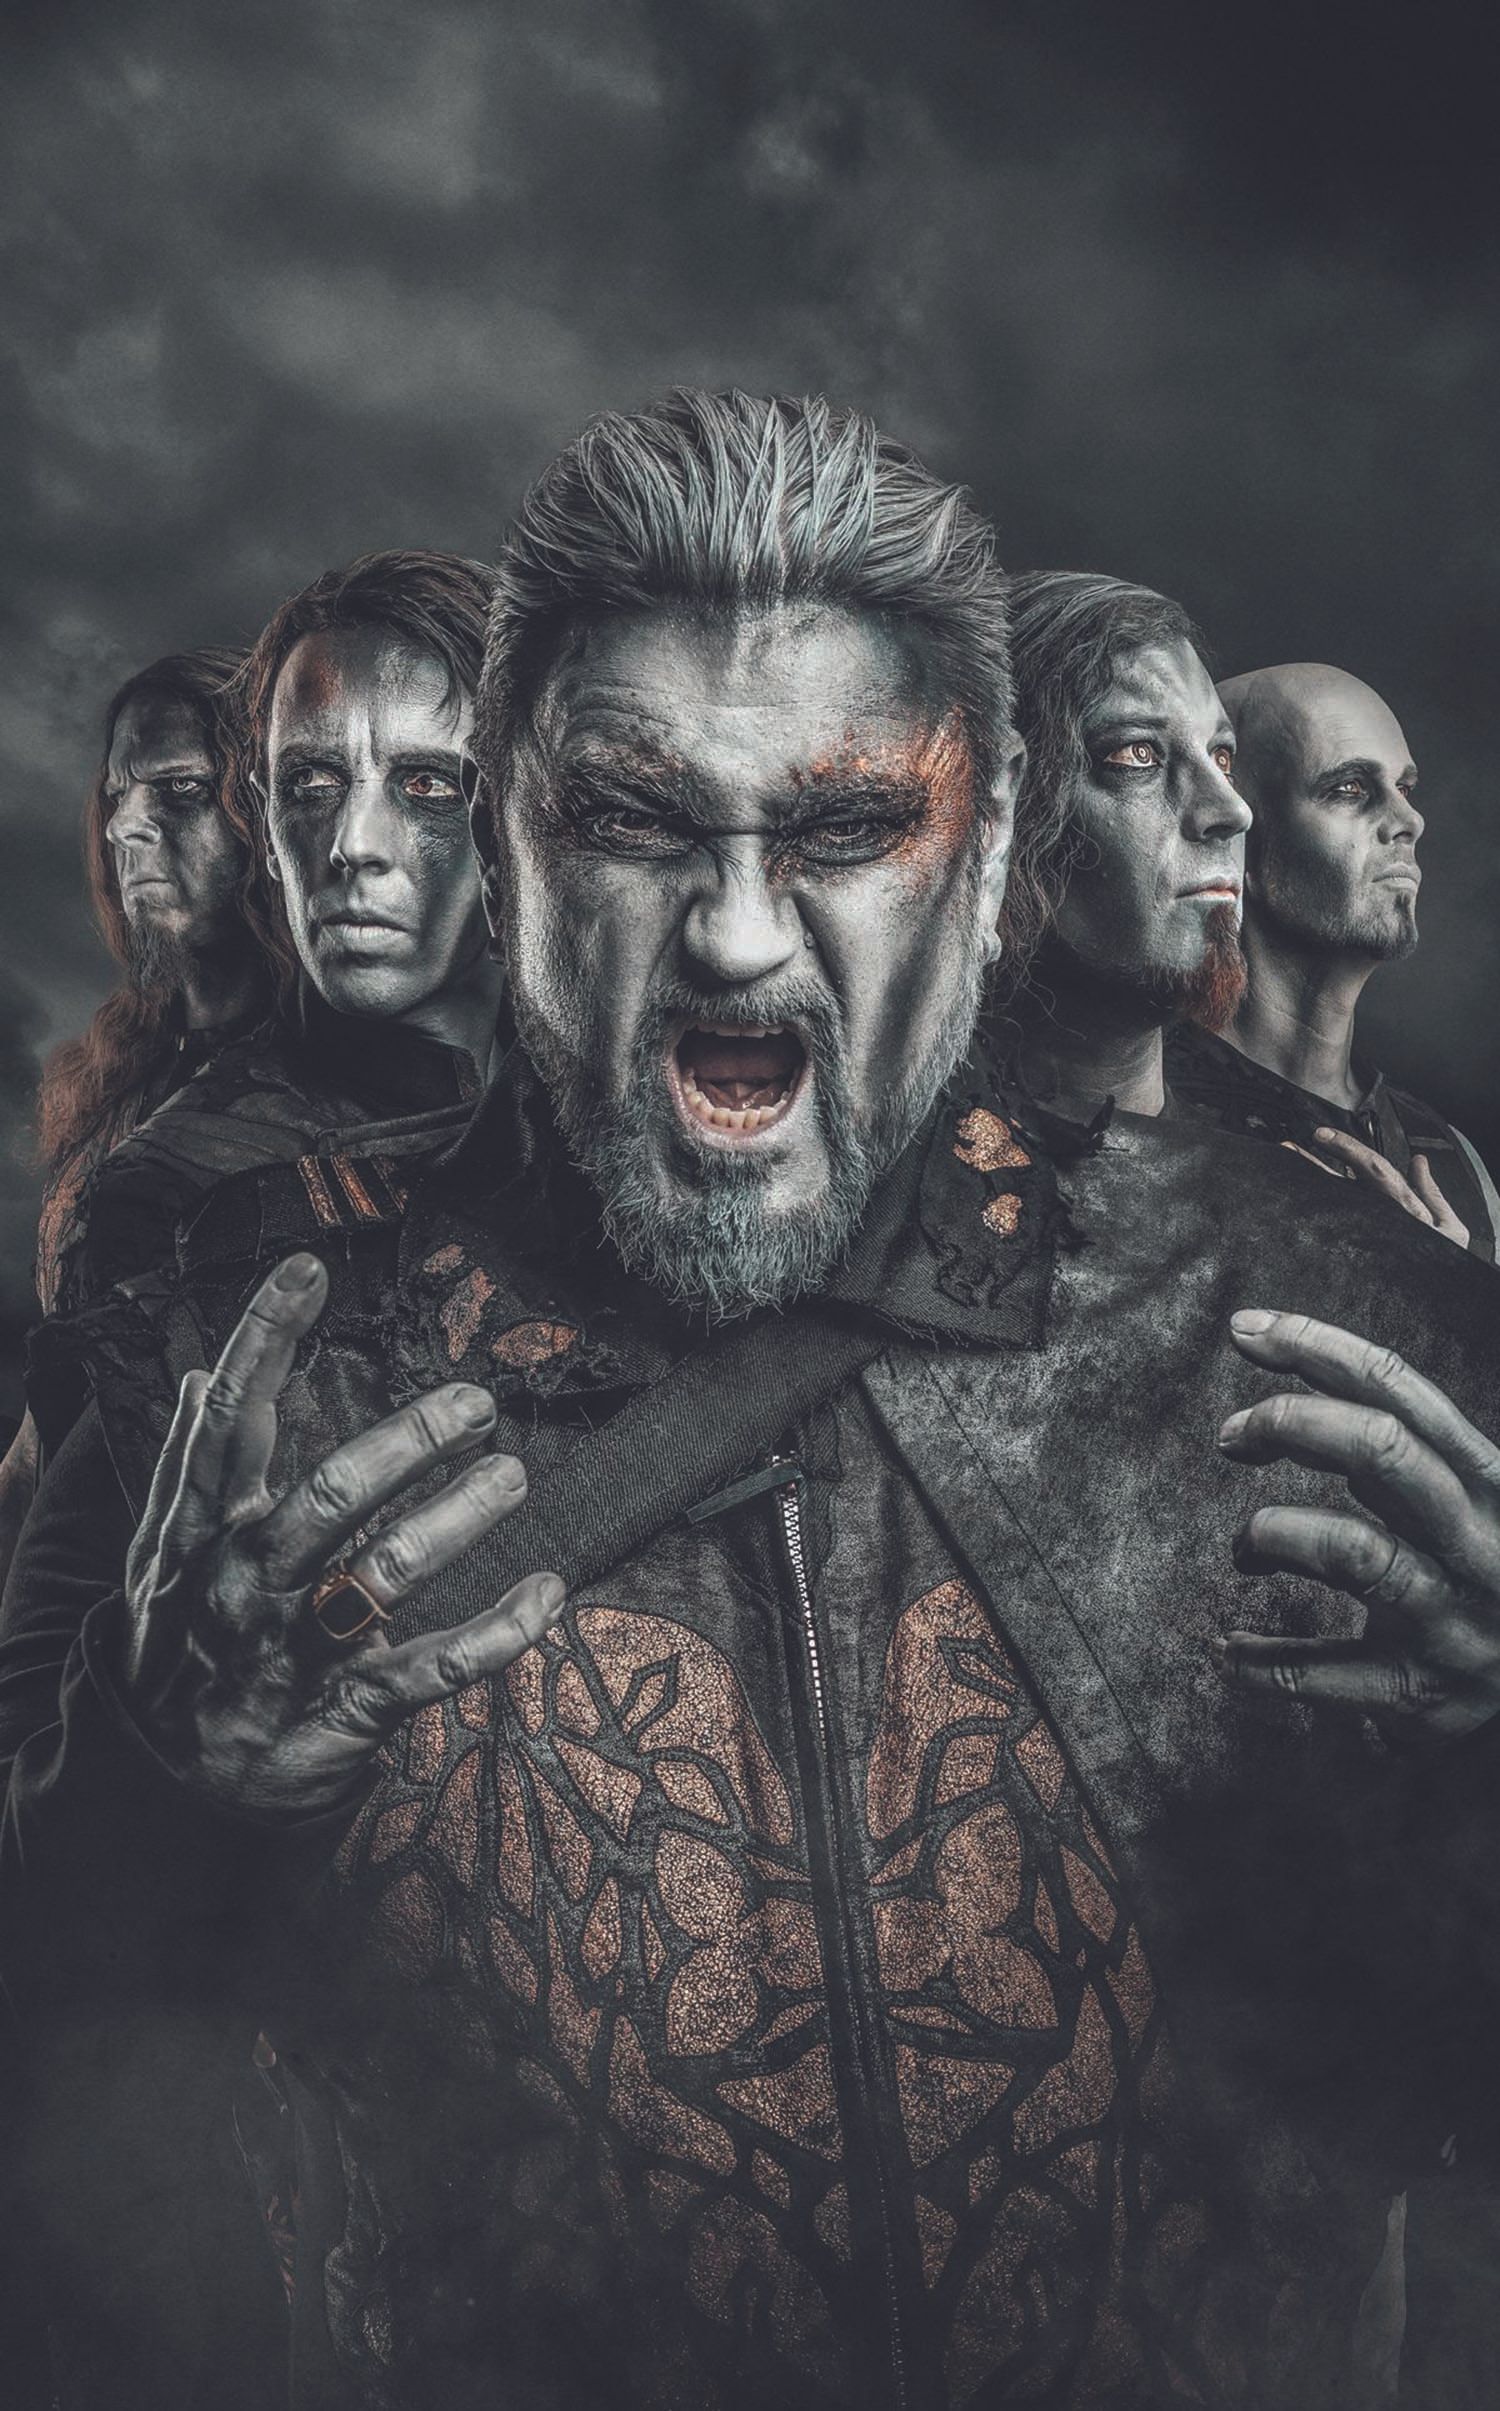 Powerwolf - 2023 - Matteo Fabbiani For Vd Pictures (Promo)